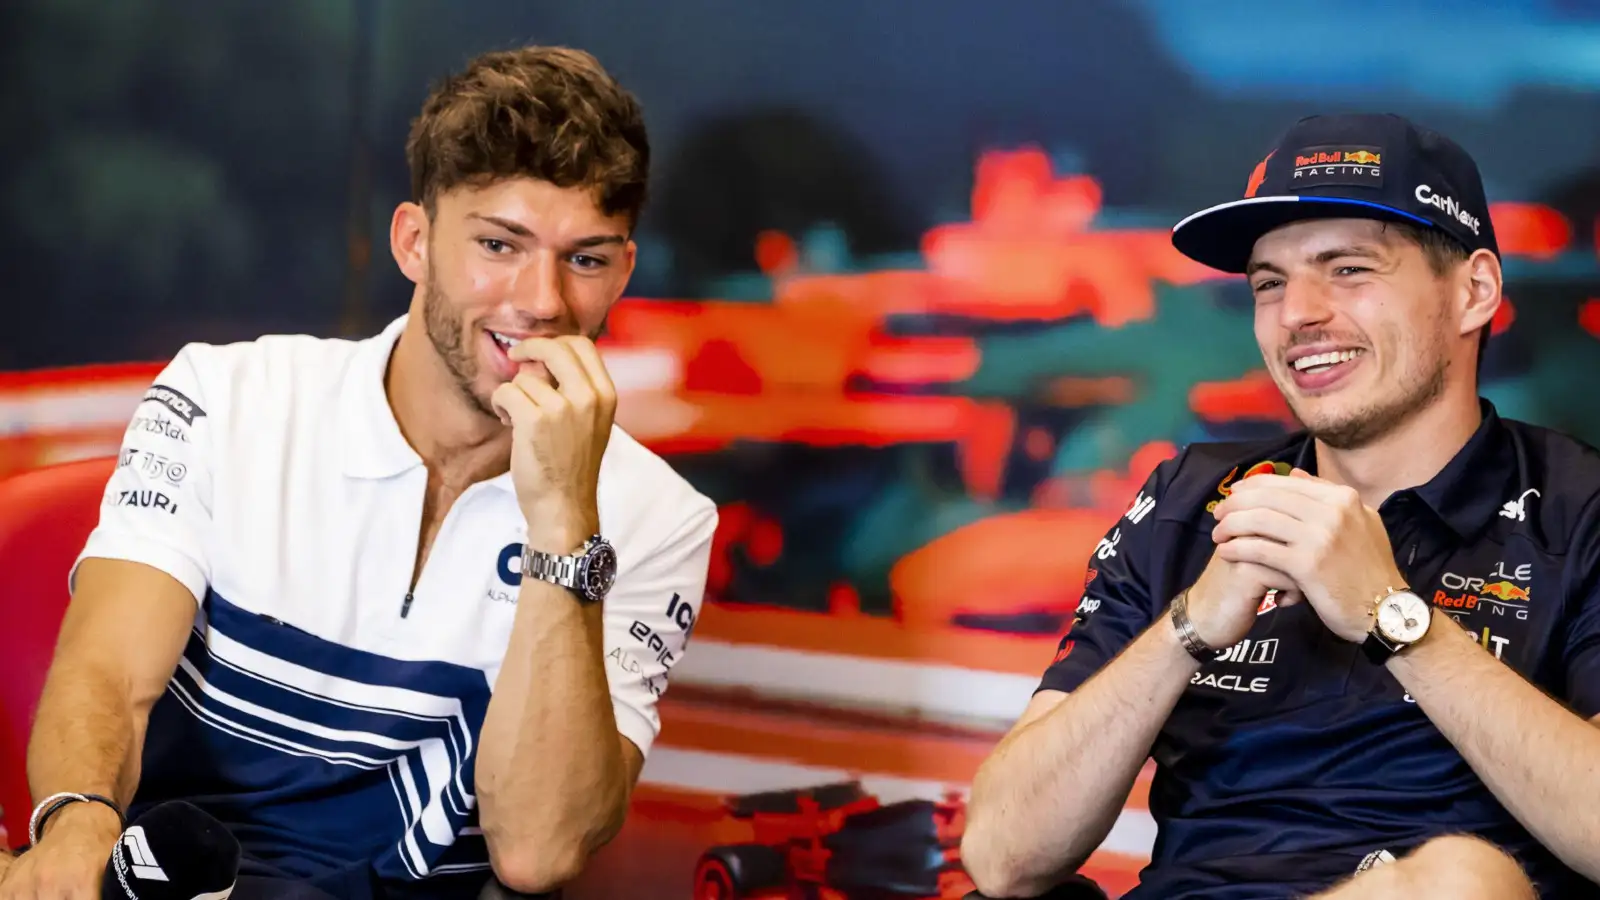 AlphaTauri's Pierre Gasly and Red Bull's Max Verstappen laugh together at the 2022 Monaco Grand Prix. Monte Carlo, May 2022. F1 penalty points